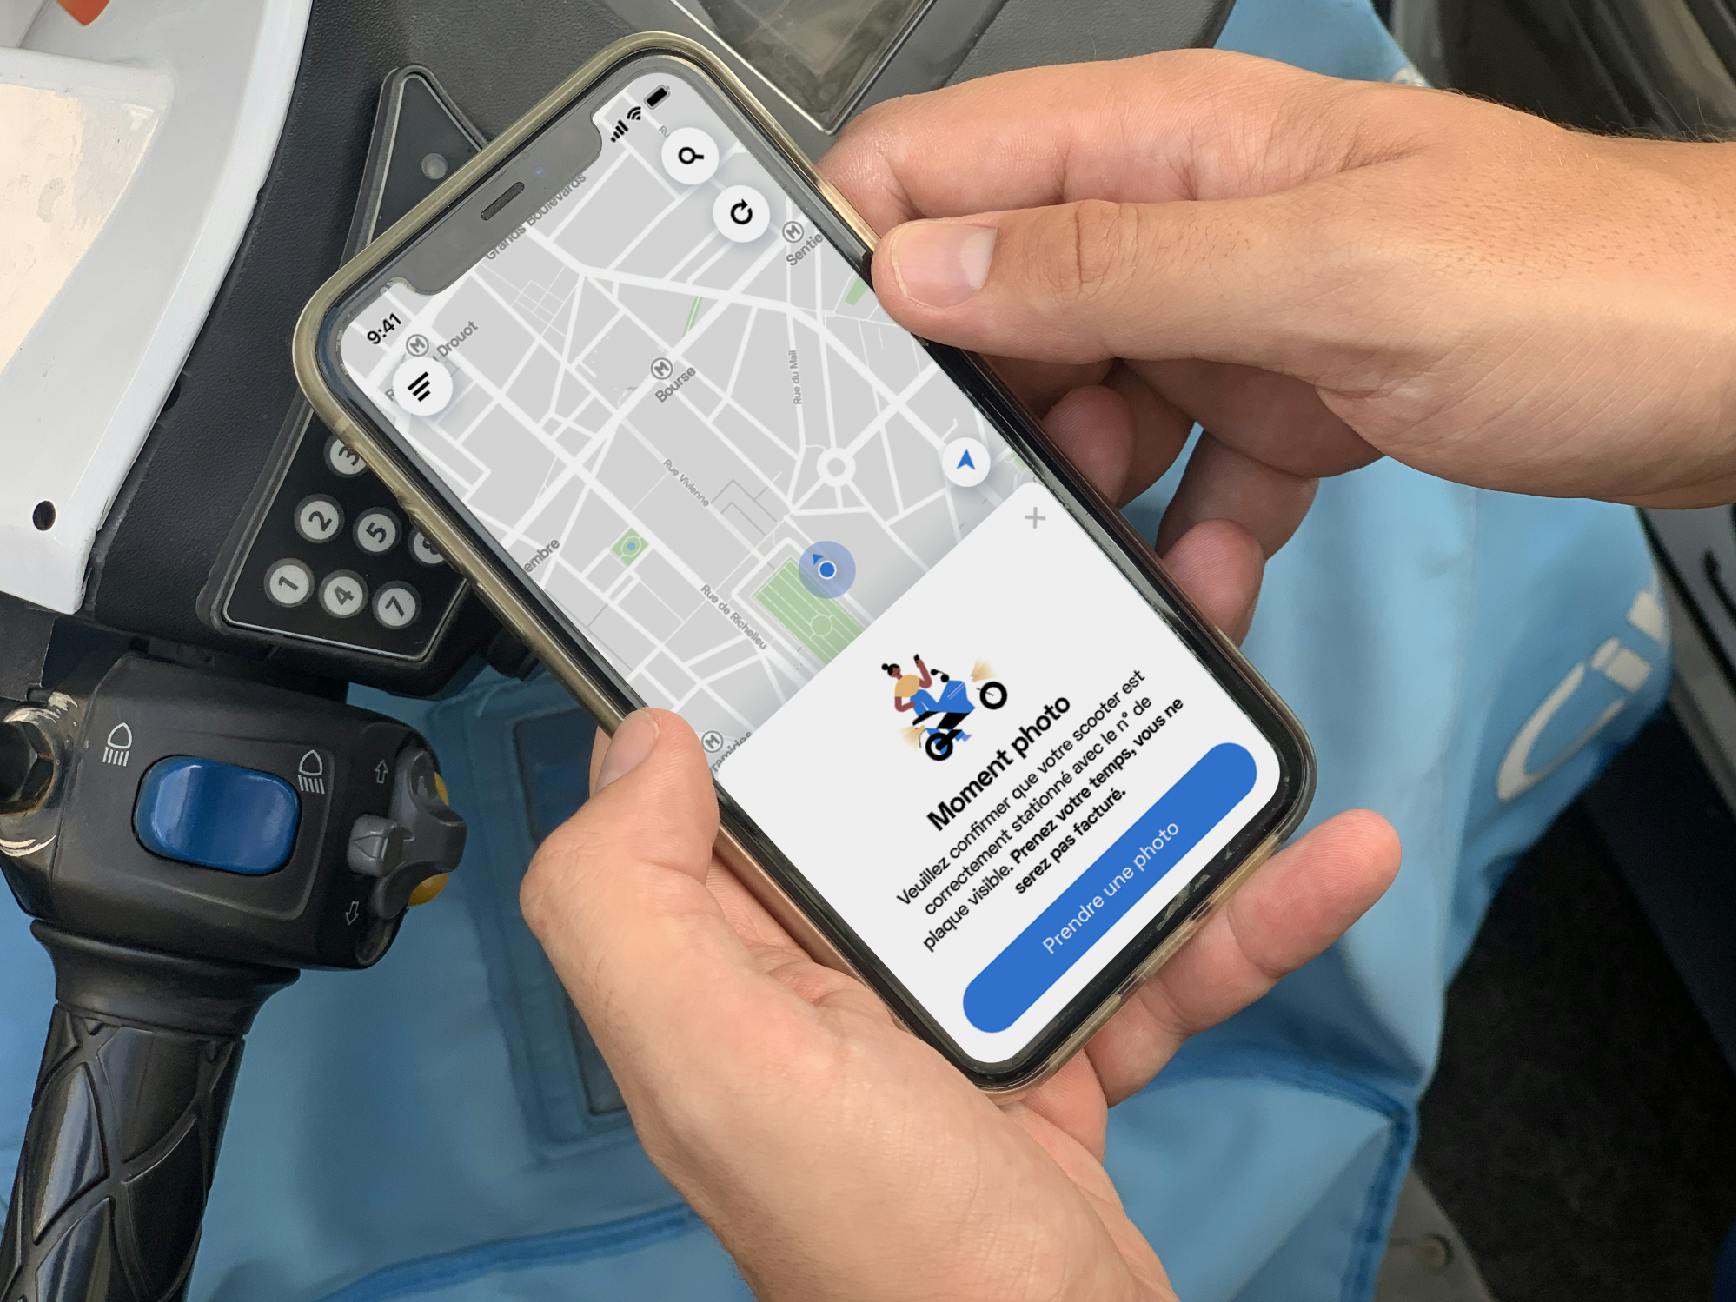 A Cityscoot's client using Deepomatic's Computer Vision Technology on their phone